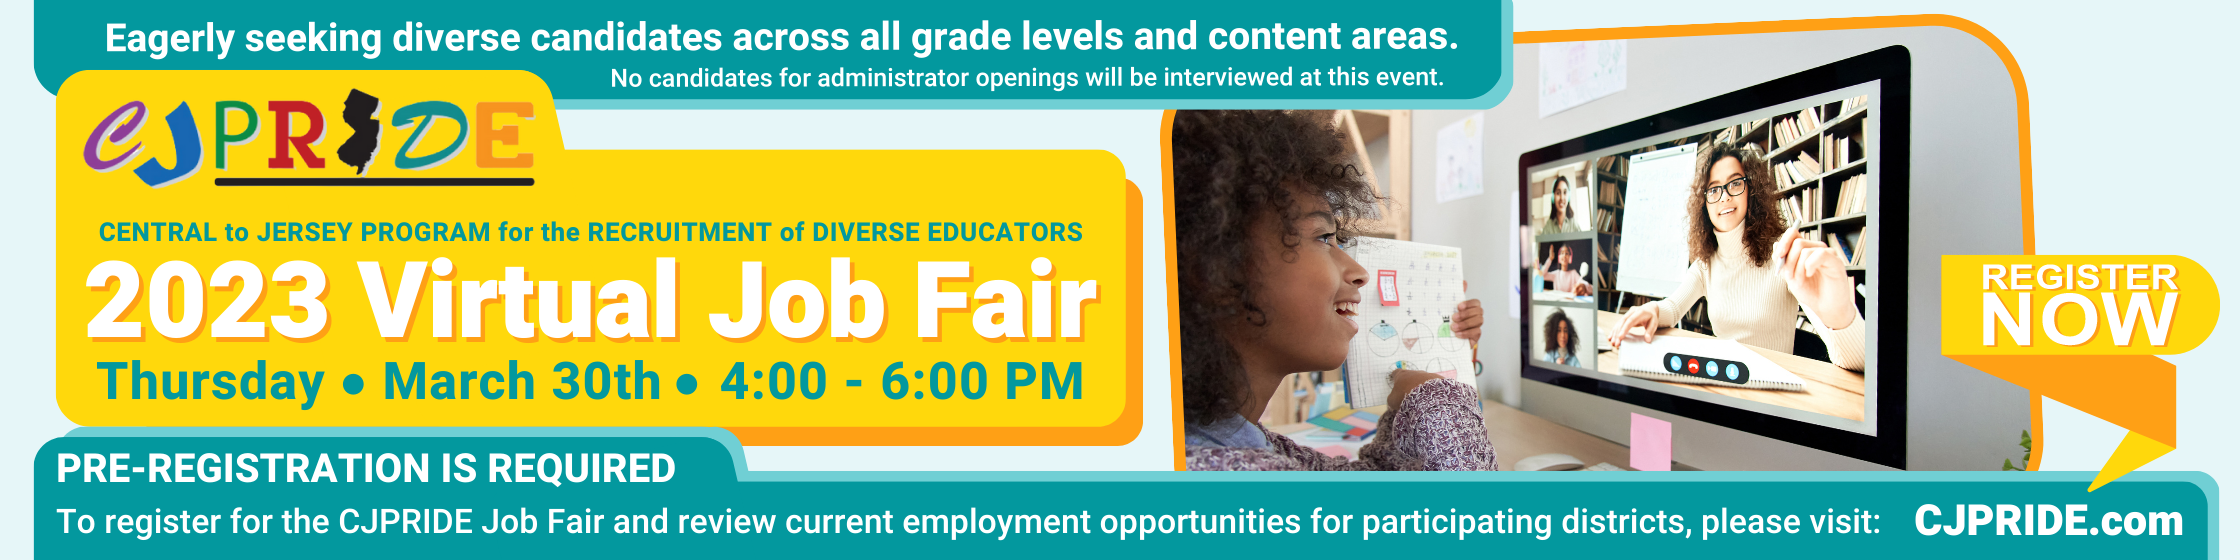 CJPRIDE 2023 Virtual Job Fair - Thursday, March 30th, 4:00 - 6:00 PM - Eagerly seeking diverse candidates across all grade levels and content areas. No candidates for administrator positions will be interviewed at this event. Pre-registration is required. To register for the CJPRIDE Job Fair and review current employment opportunities for participating districts, please visit: CJPRIDE.com - Register Now!